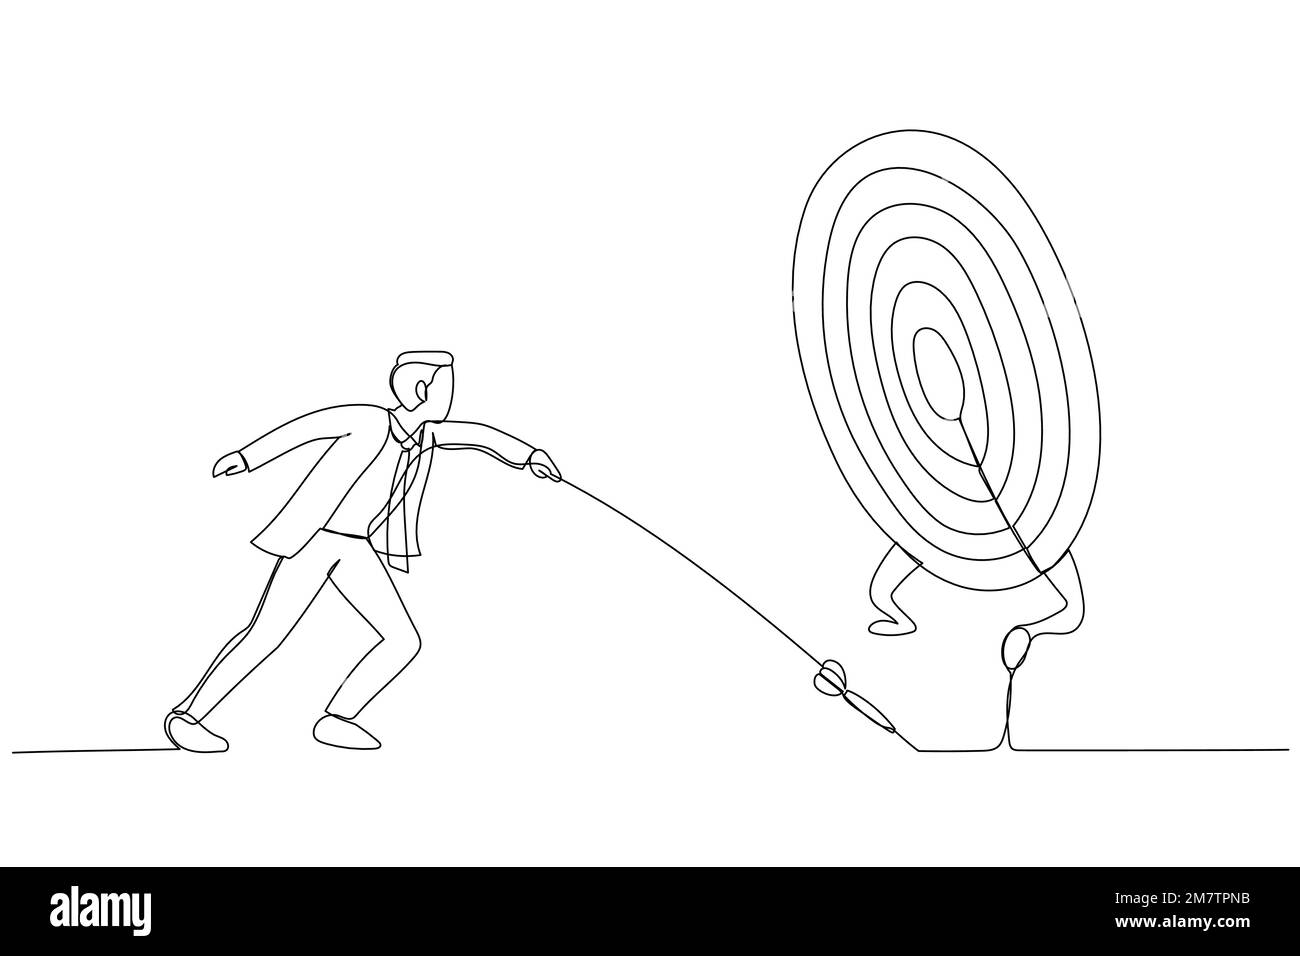 Drawing of businessman try to hit a target. Single continuous line art Stock Vector